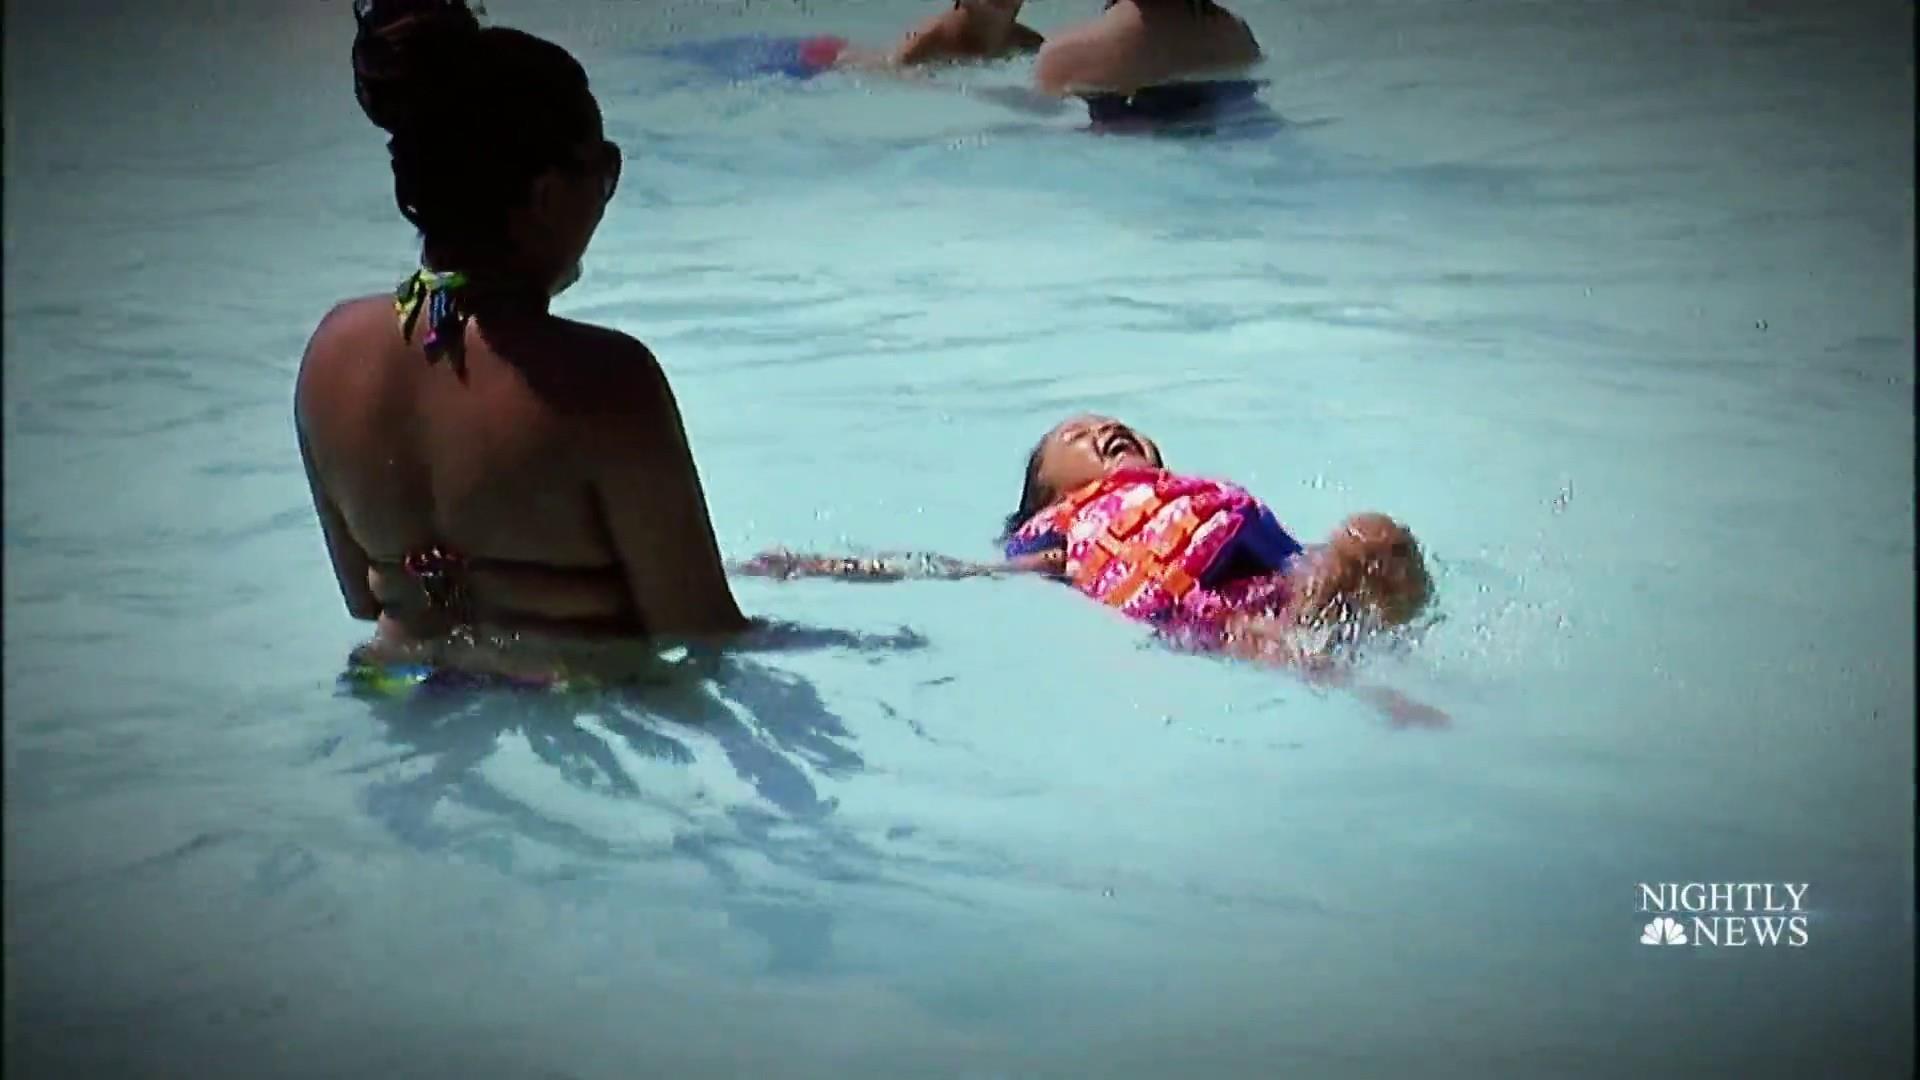 More children are drowning in open water than pools, study shows